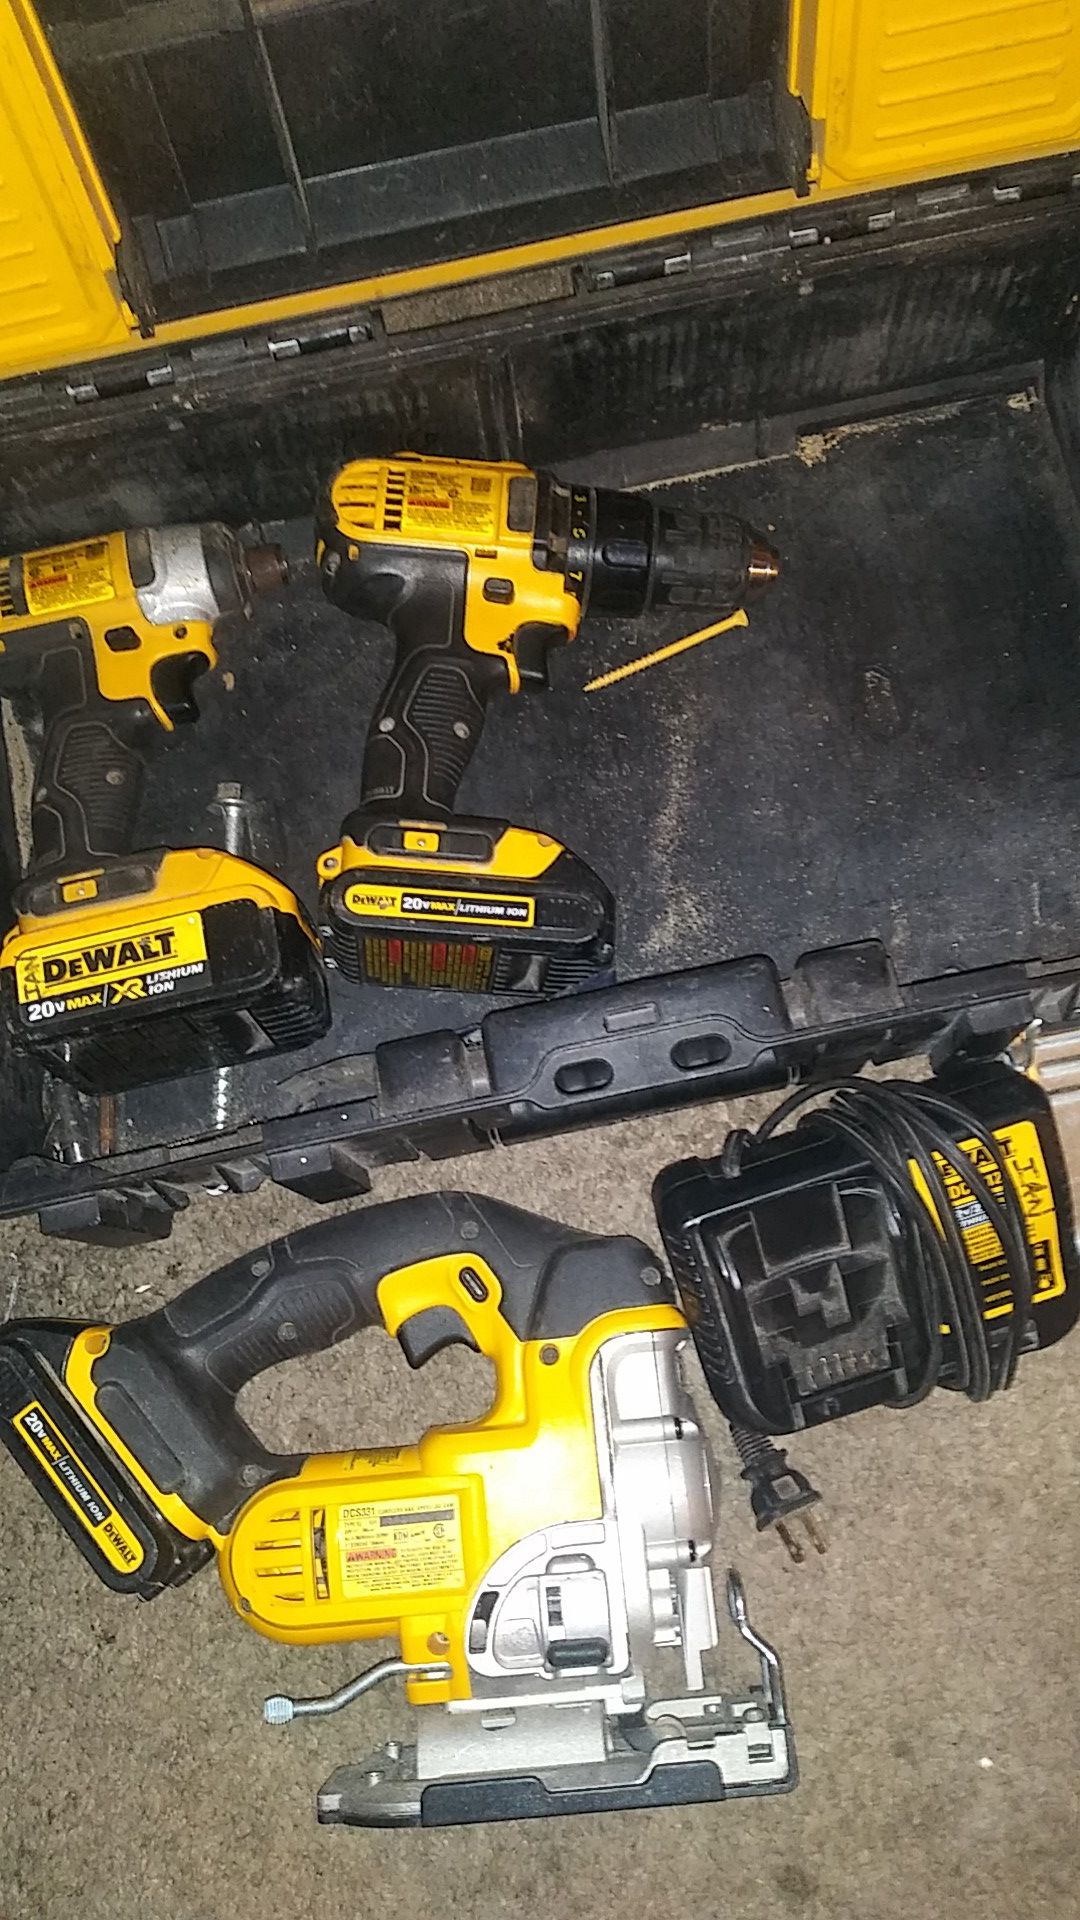 Jigsaw impact and drill driver